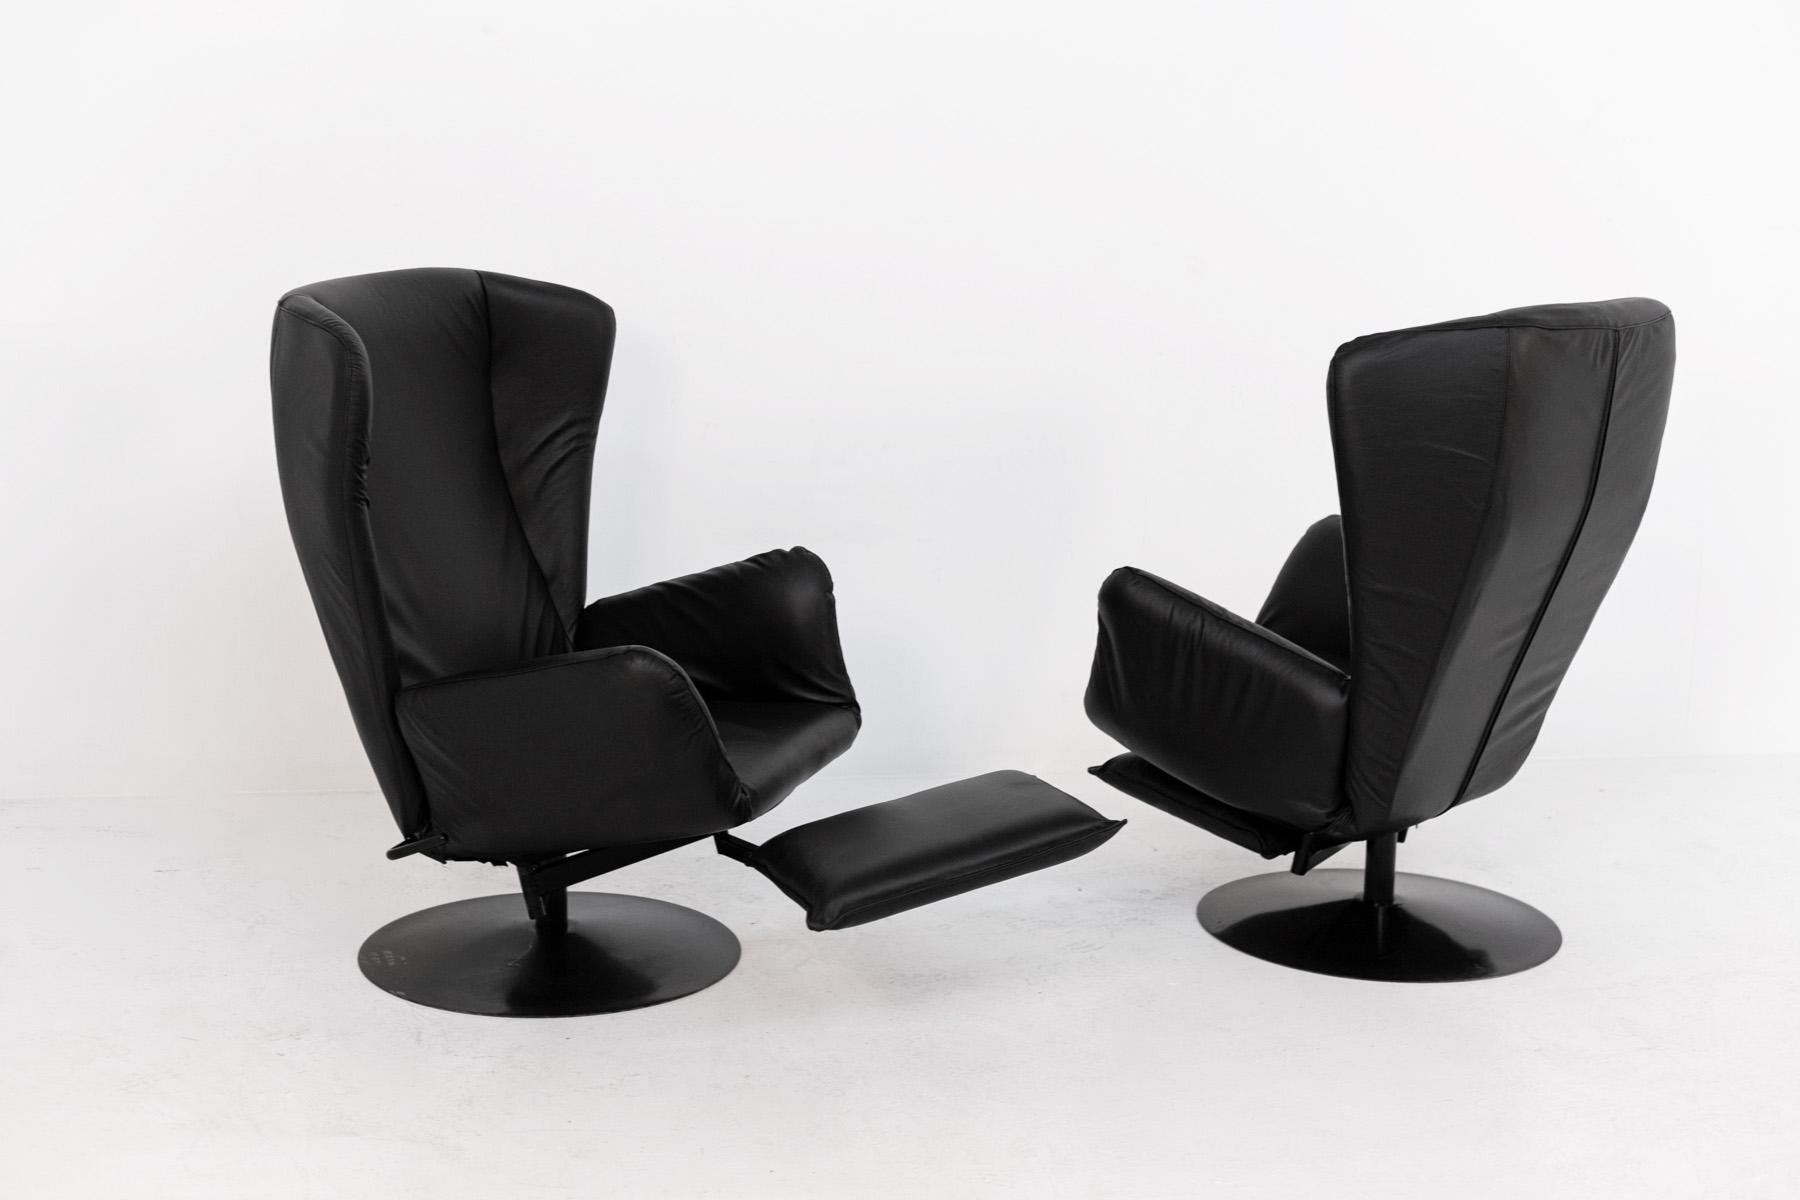 Eccentric pair armchairs in black leather from the 1970s. 
The pair of armchairs have been recently restored. The armchairs have several particularities, noteworthy are its ears above its backrest. Another note is its removable cushion footrest